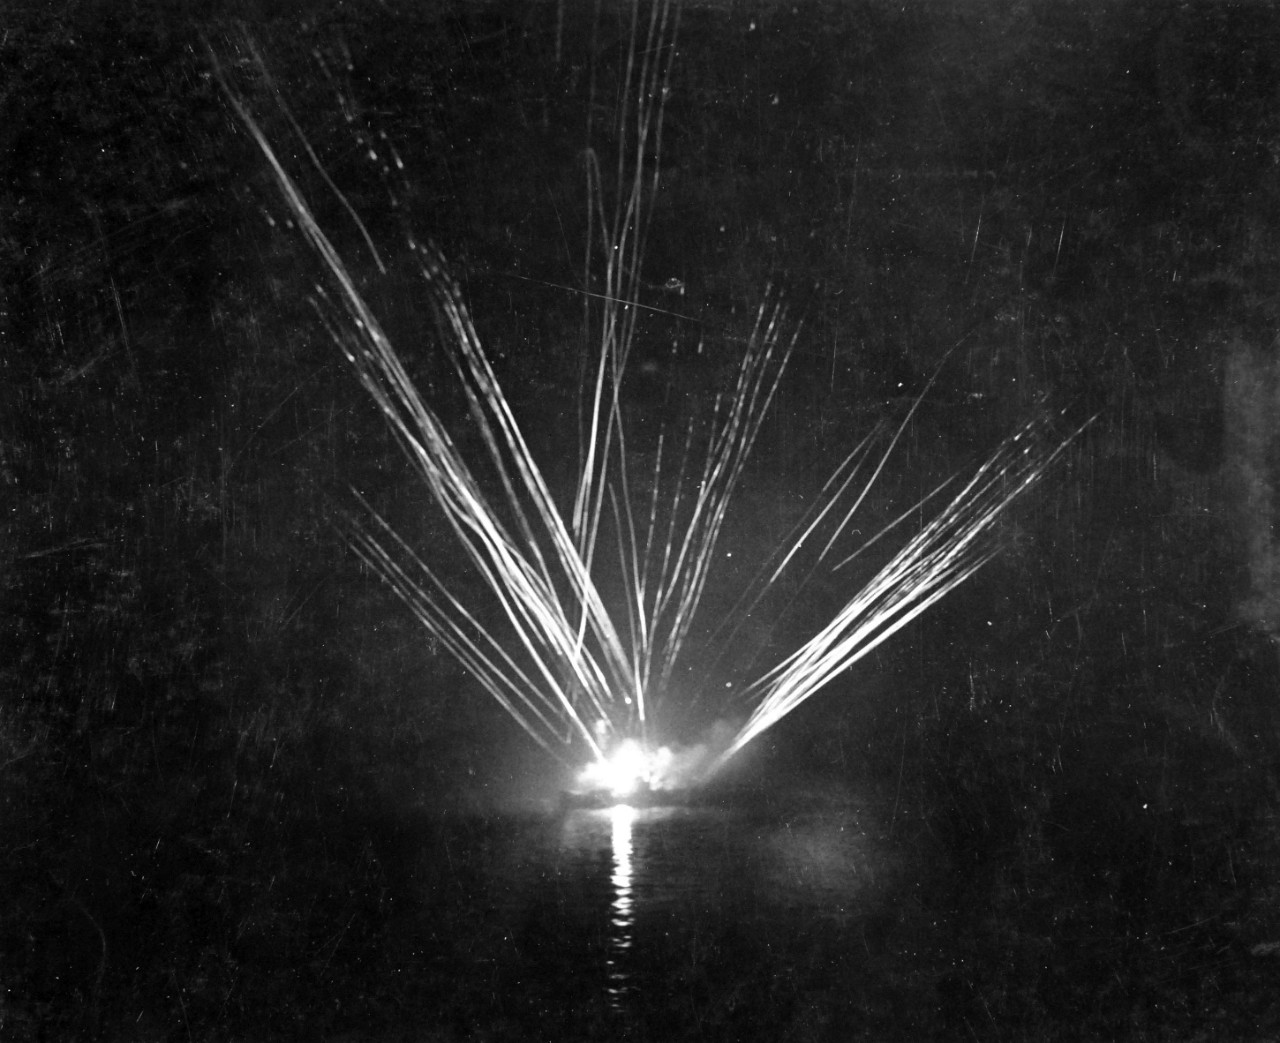 80-G-87328:  Operation Avalanche, September 1943.  Anti-aircraft fire from one of the protecting cruisers in the Gulf of Salerno, Italy.  Photograph released September 12, 1943.   U.S. Navy photograph, now in the collections of the National Archives.  (2017/04/04).